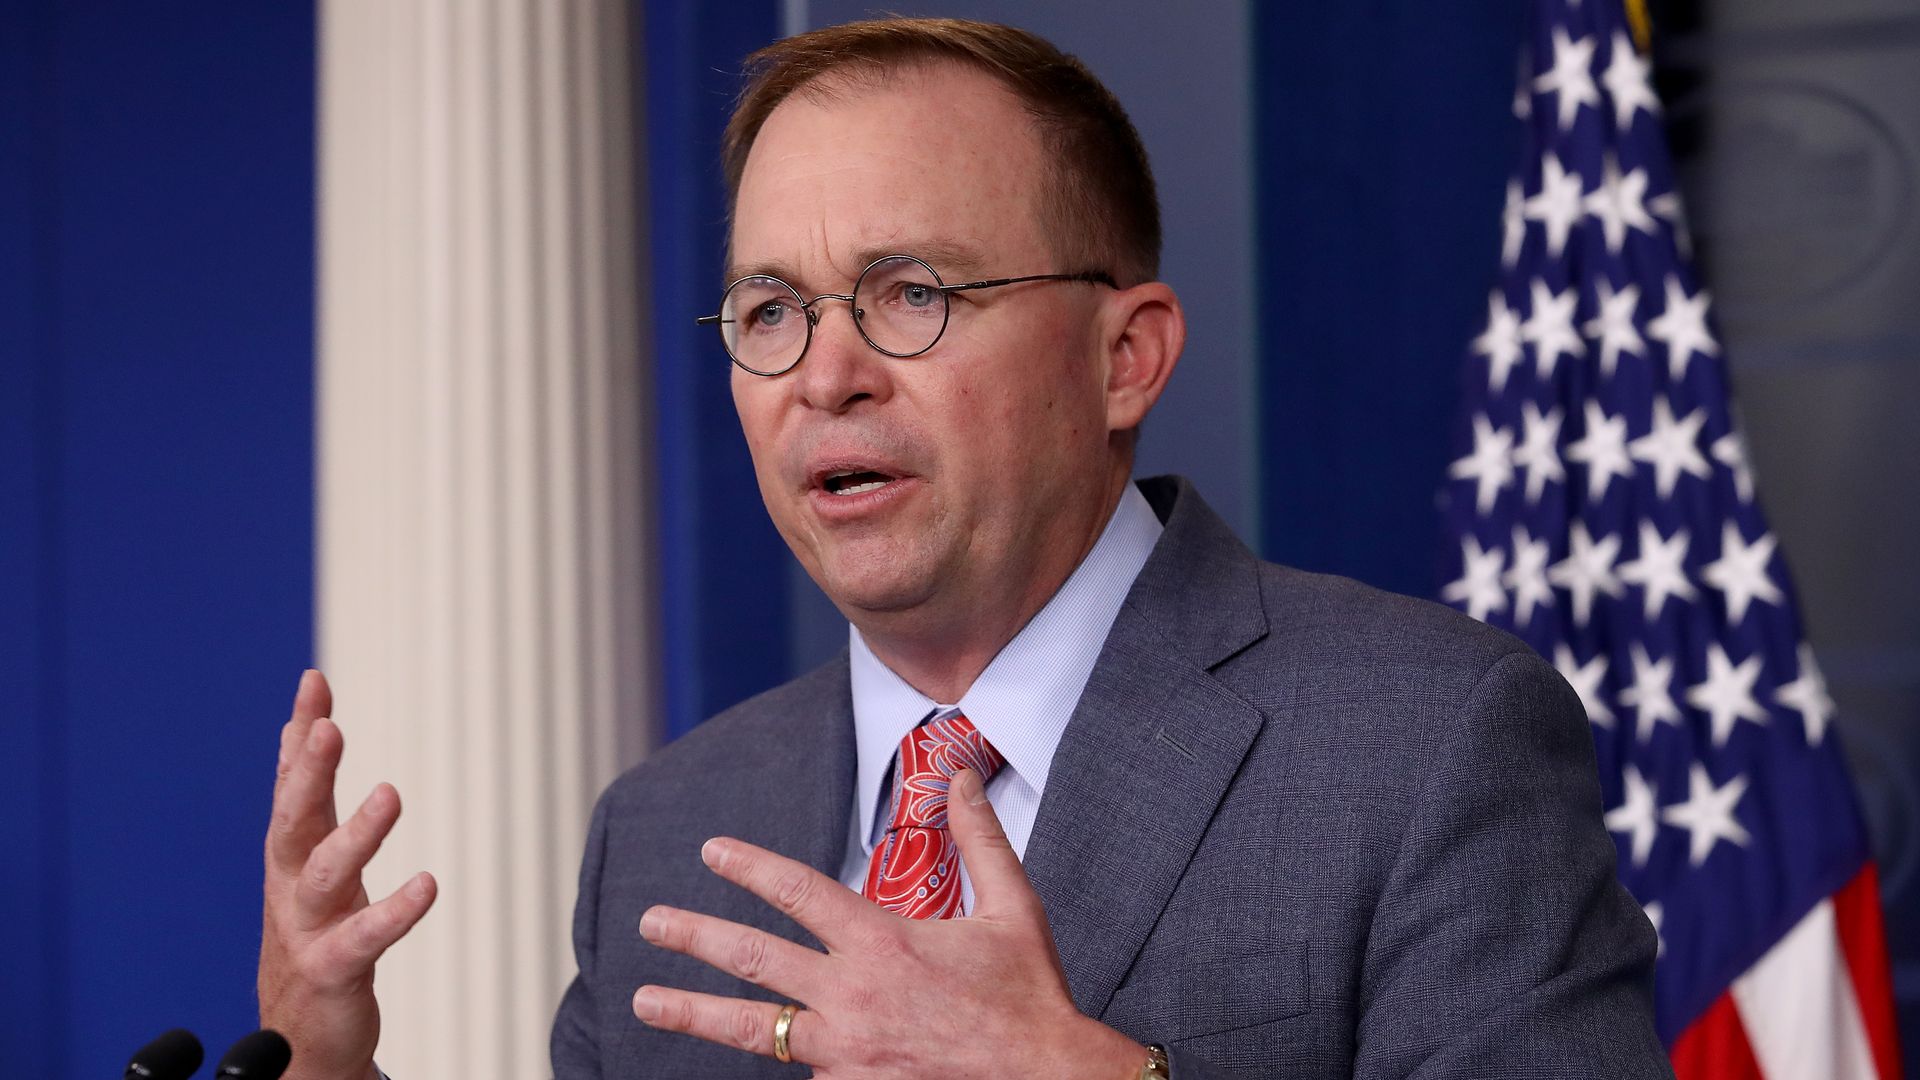 Acting White House Chief of Staff Mick Mulvaney answers questions during a briefing at the White House October 17, 2019 in Washington, DC.